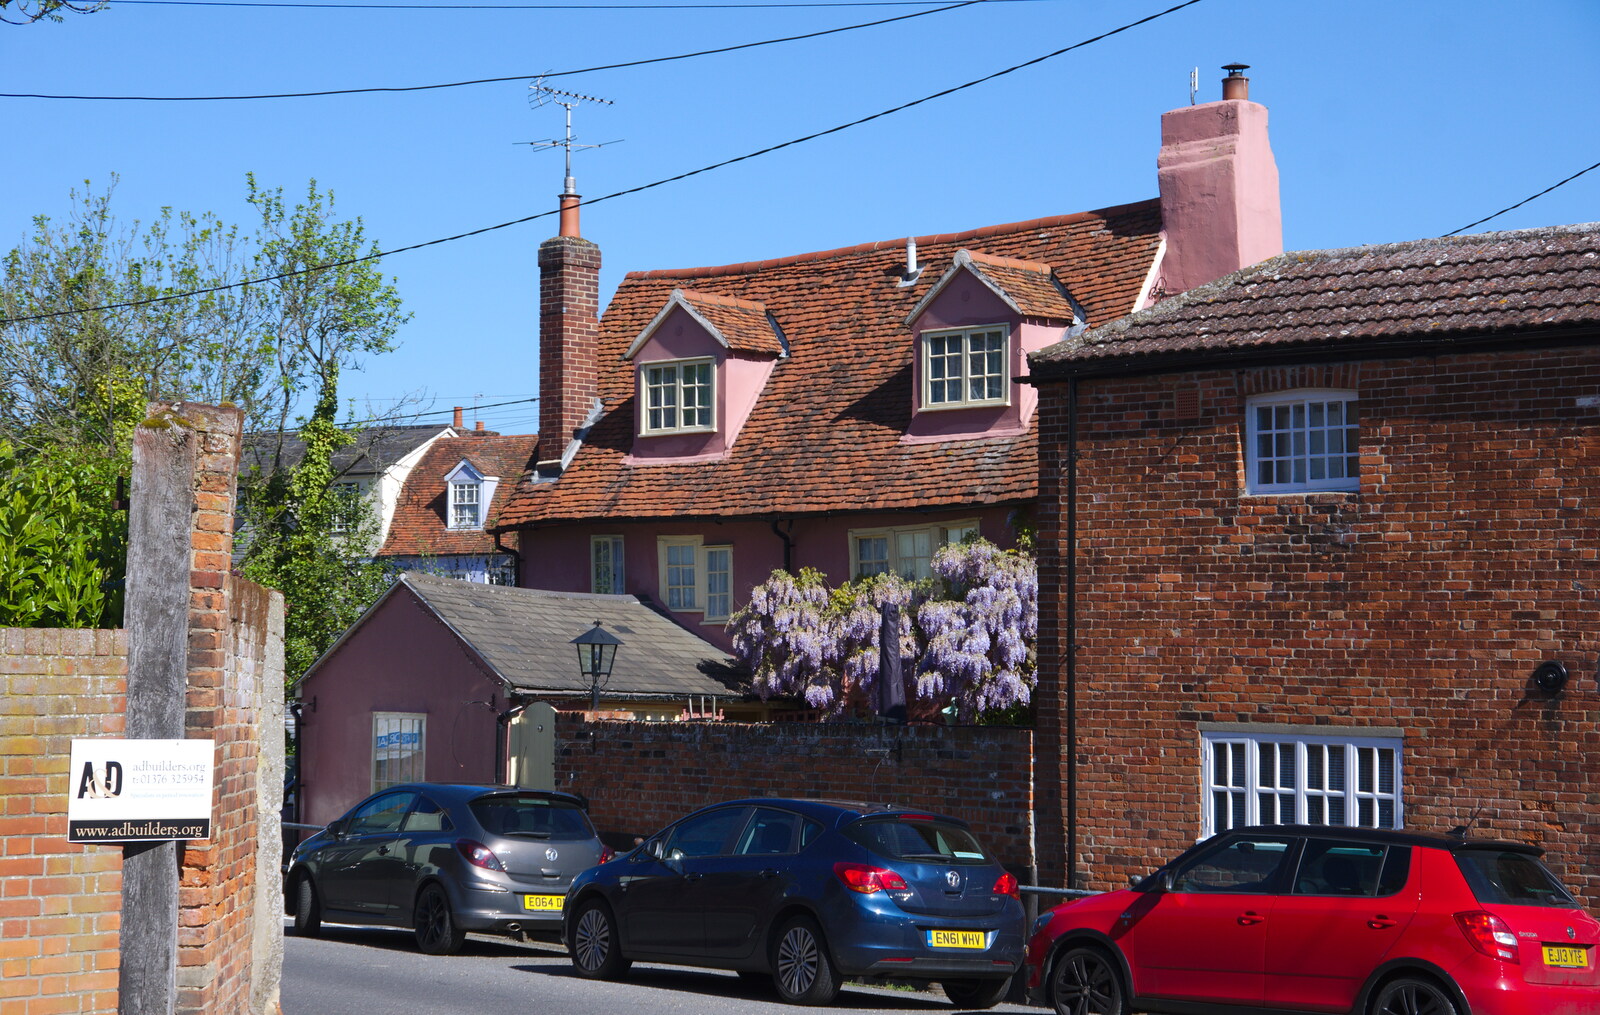 Another wisteria house from The BSCC Bike Ride 2019, Coggeshall, Essex - 11th May 2019